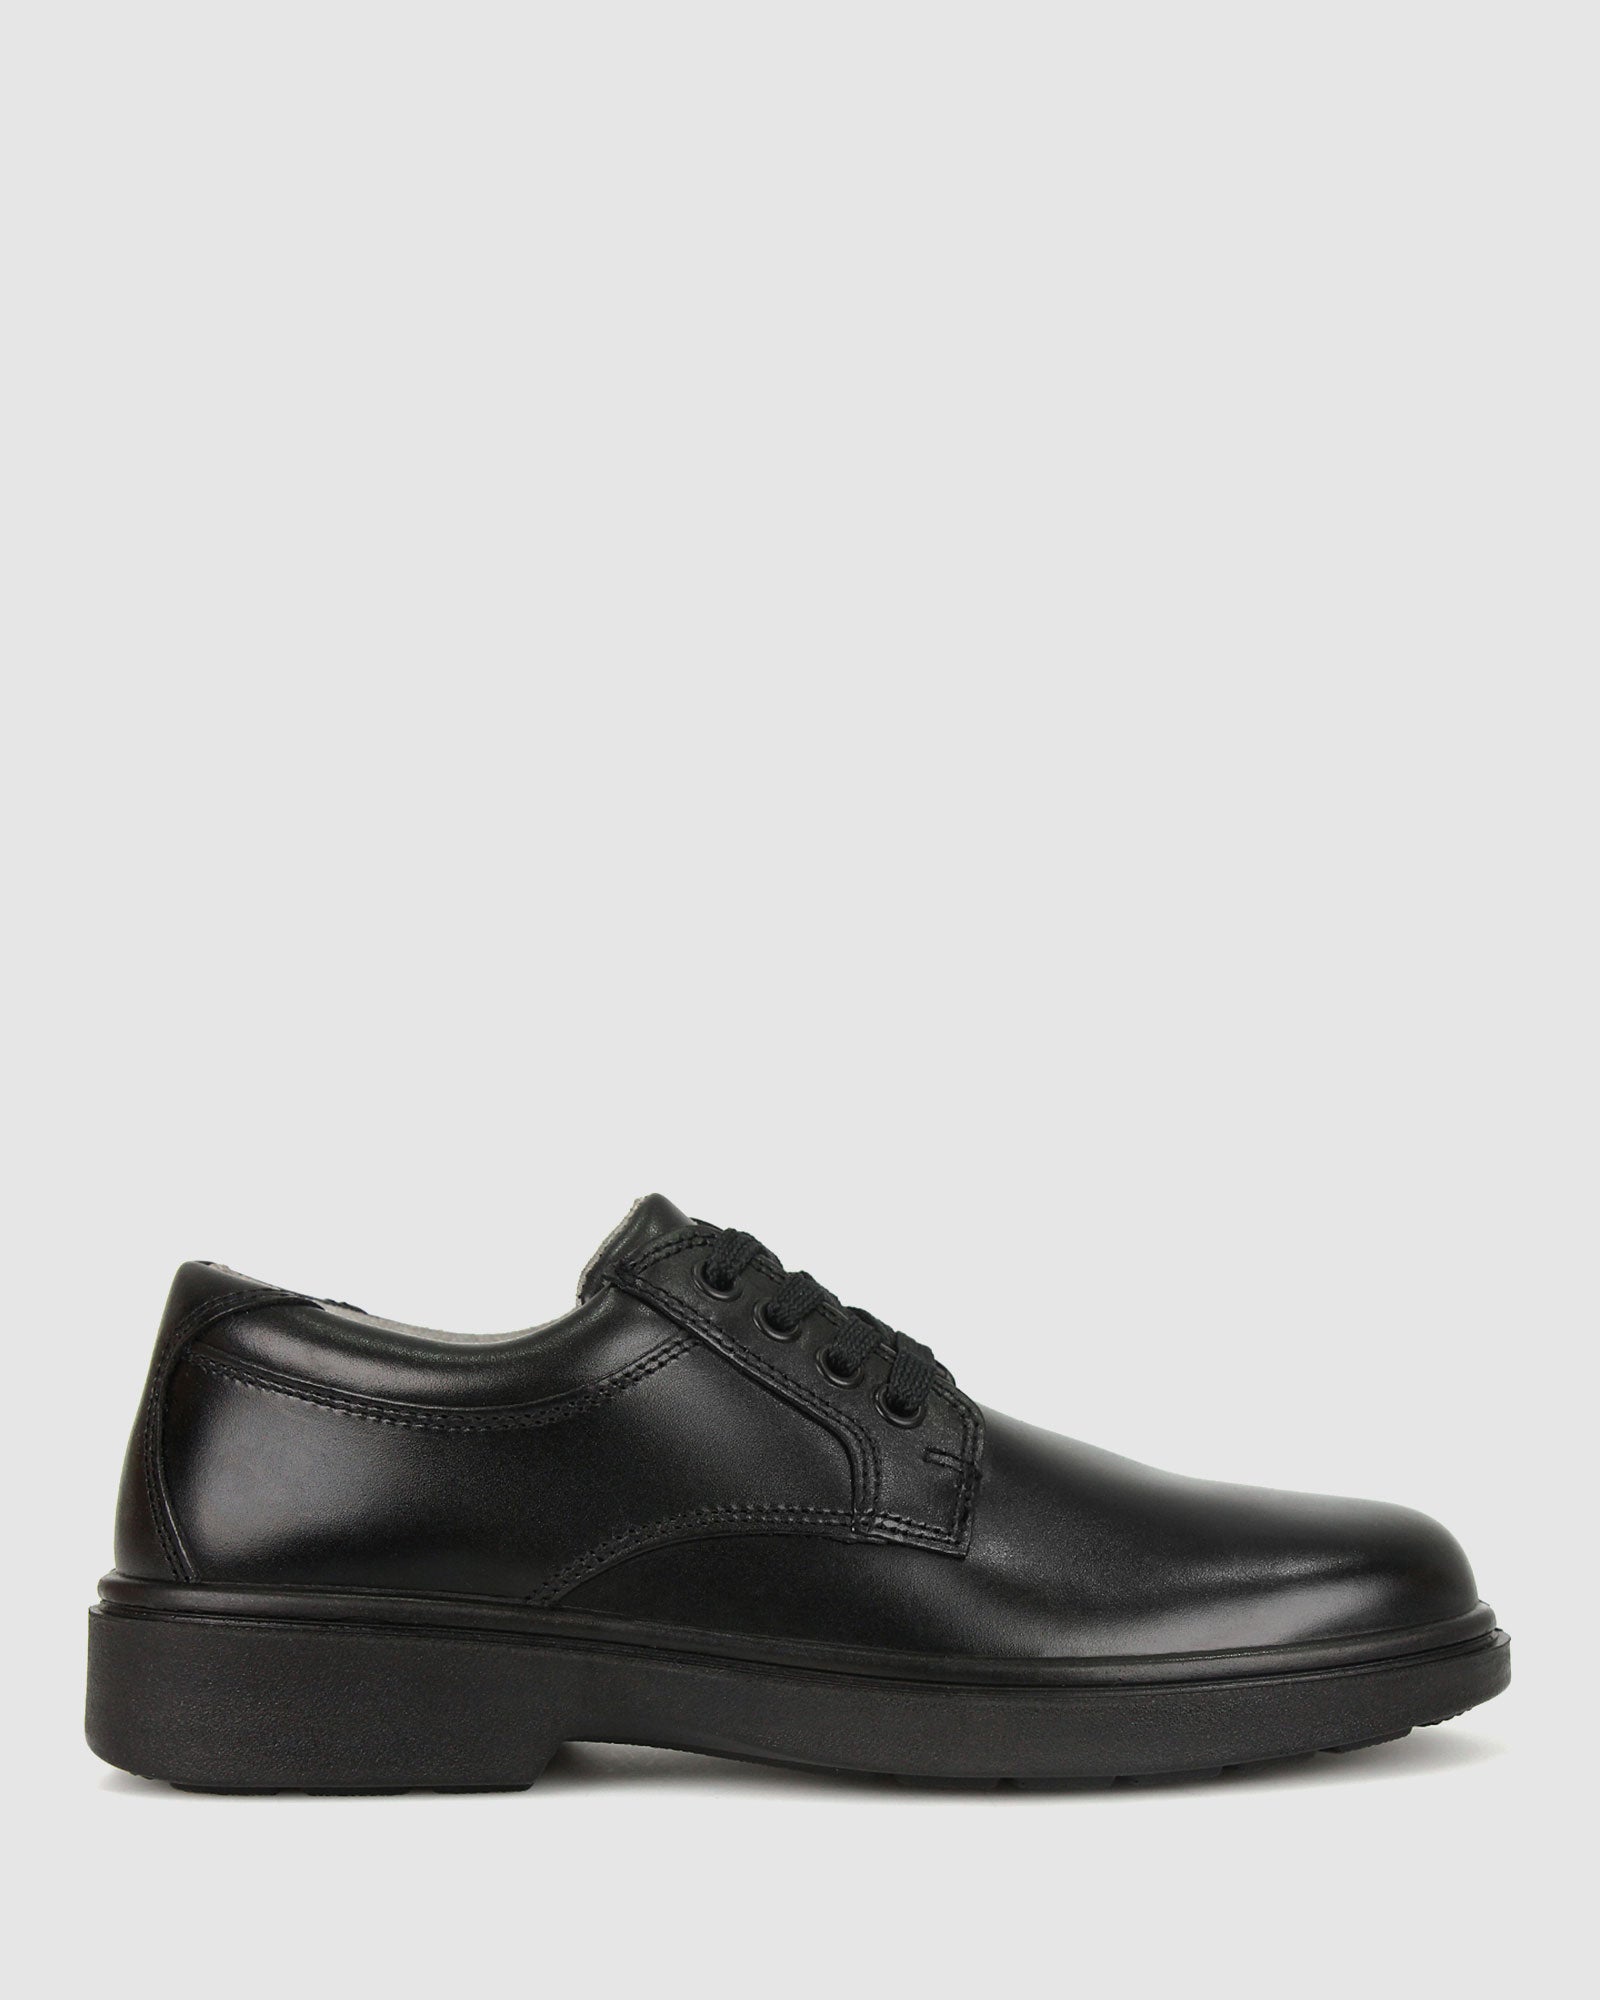 Buy DIRECT D/E Junior Leather School Shoes by Airflex online - Betts